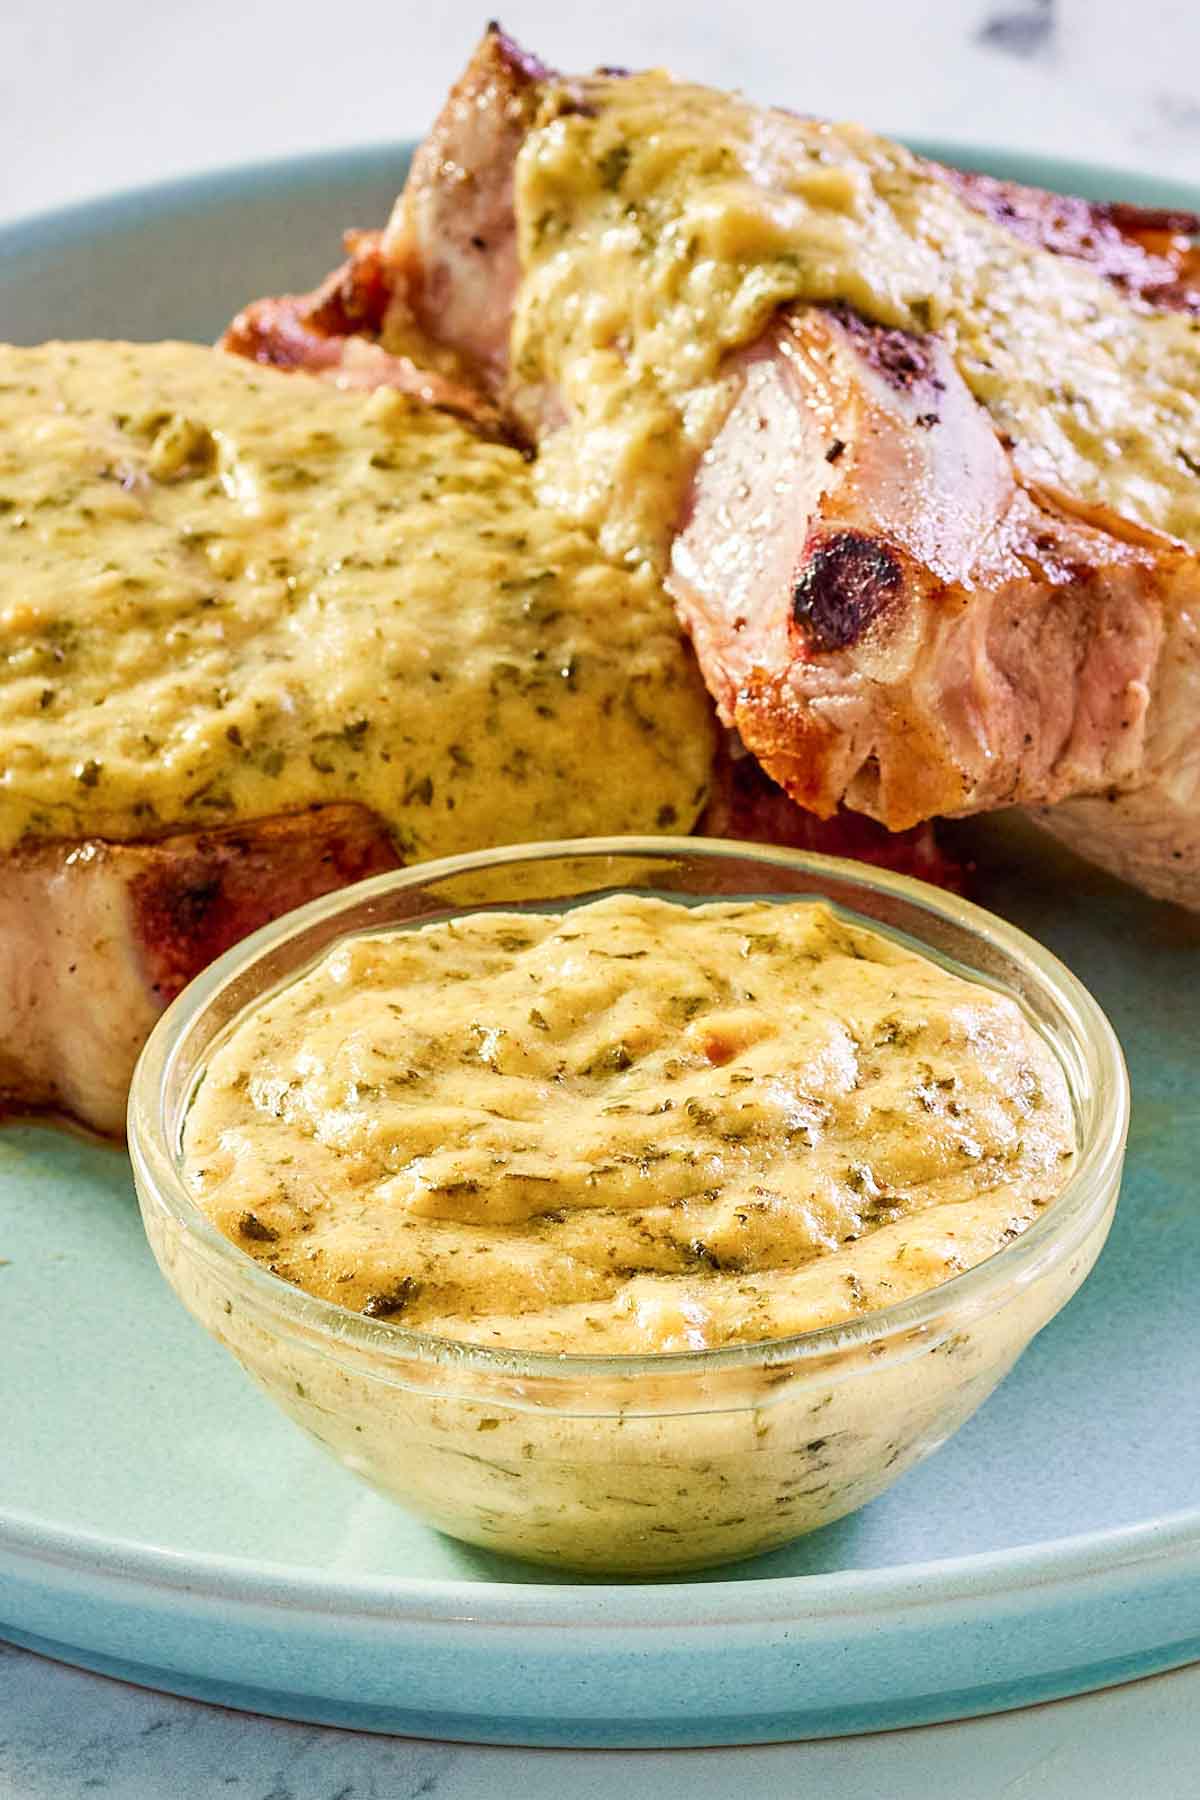 Mustard cream sauce in a small bowl and over pork chops on a plate.